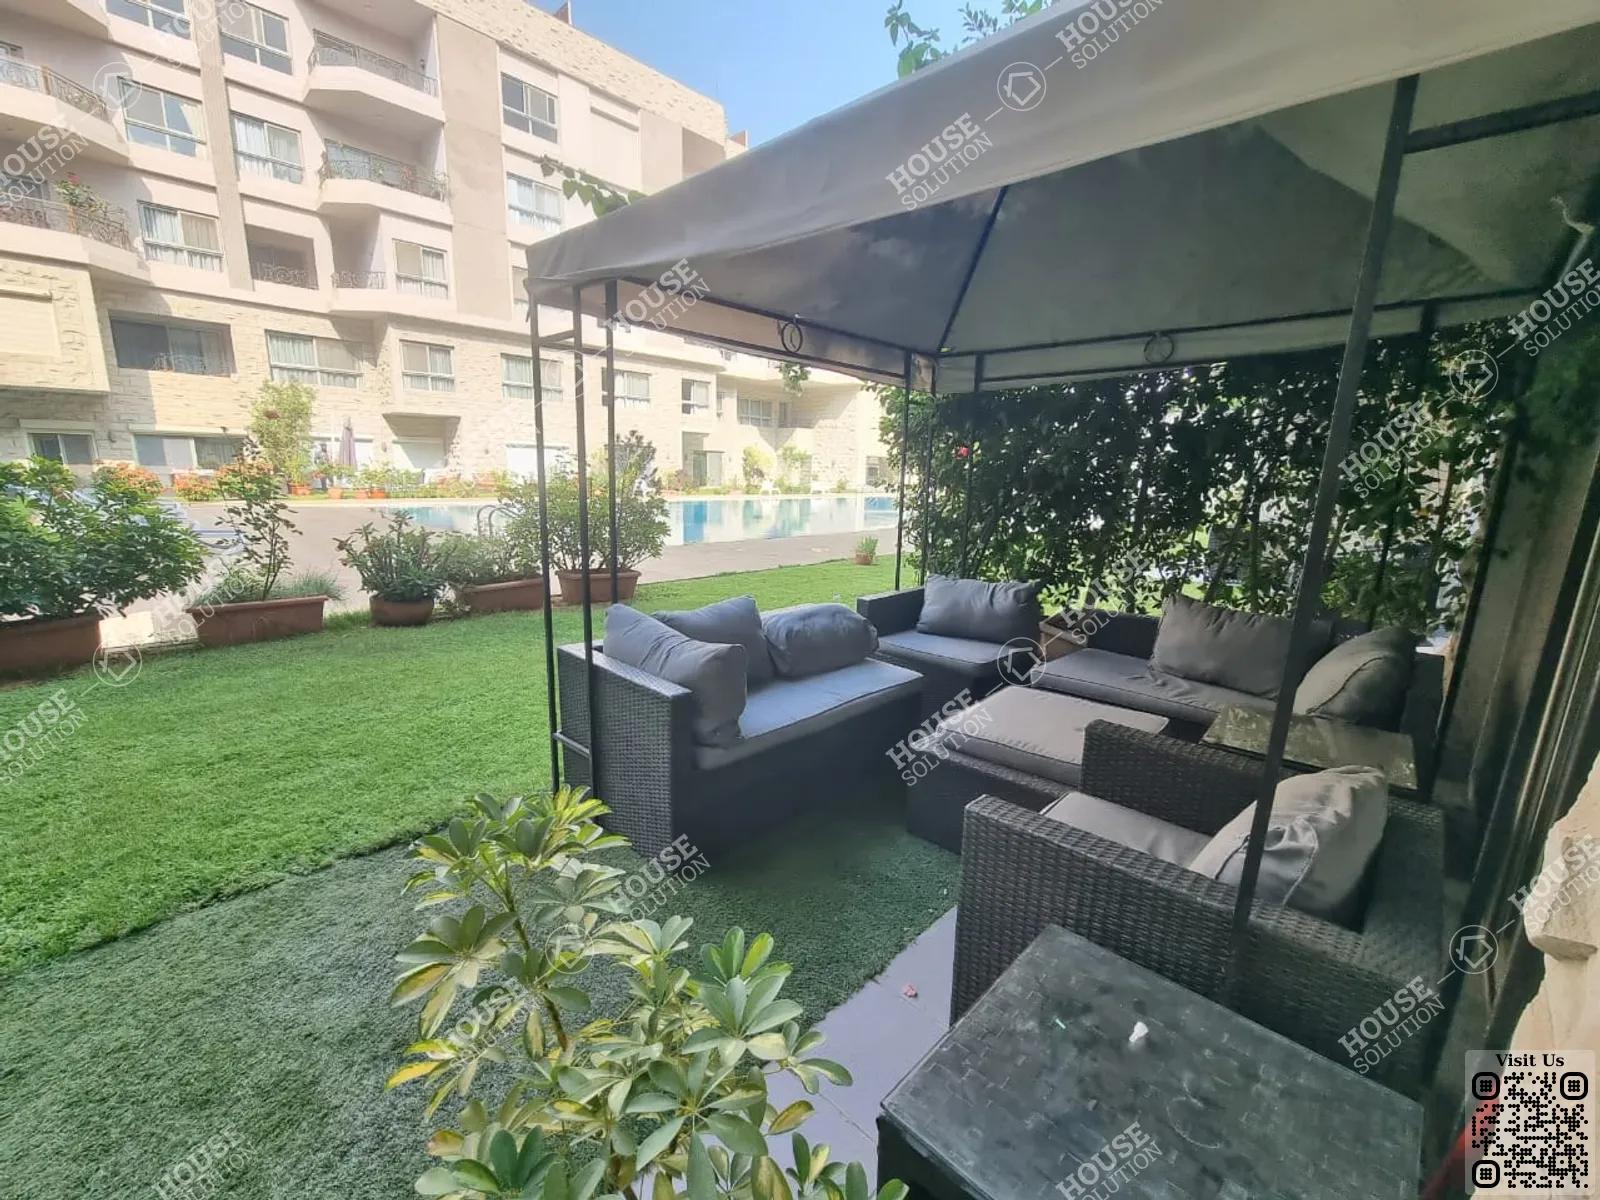 PRIVATE GARDEN  @ Ground Floors For Rent In Maadi Maadi Sarayat Area: 320 m² consists of 4 Bedrooms 4 Bathrooms Modern furnished 5 stars #5682-0